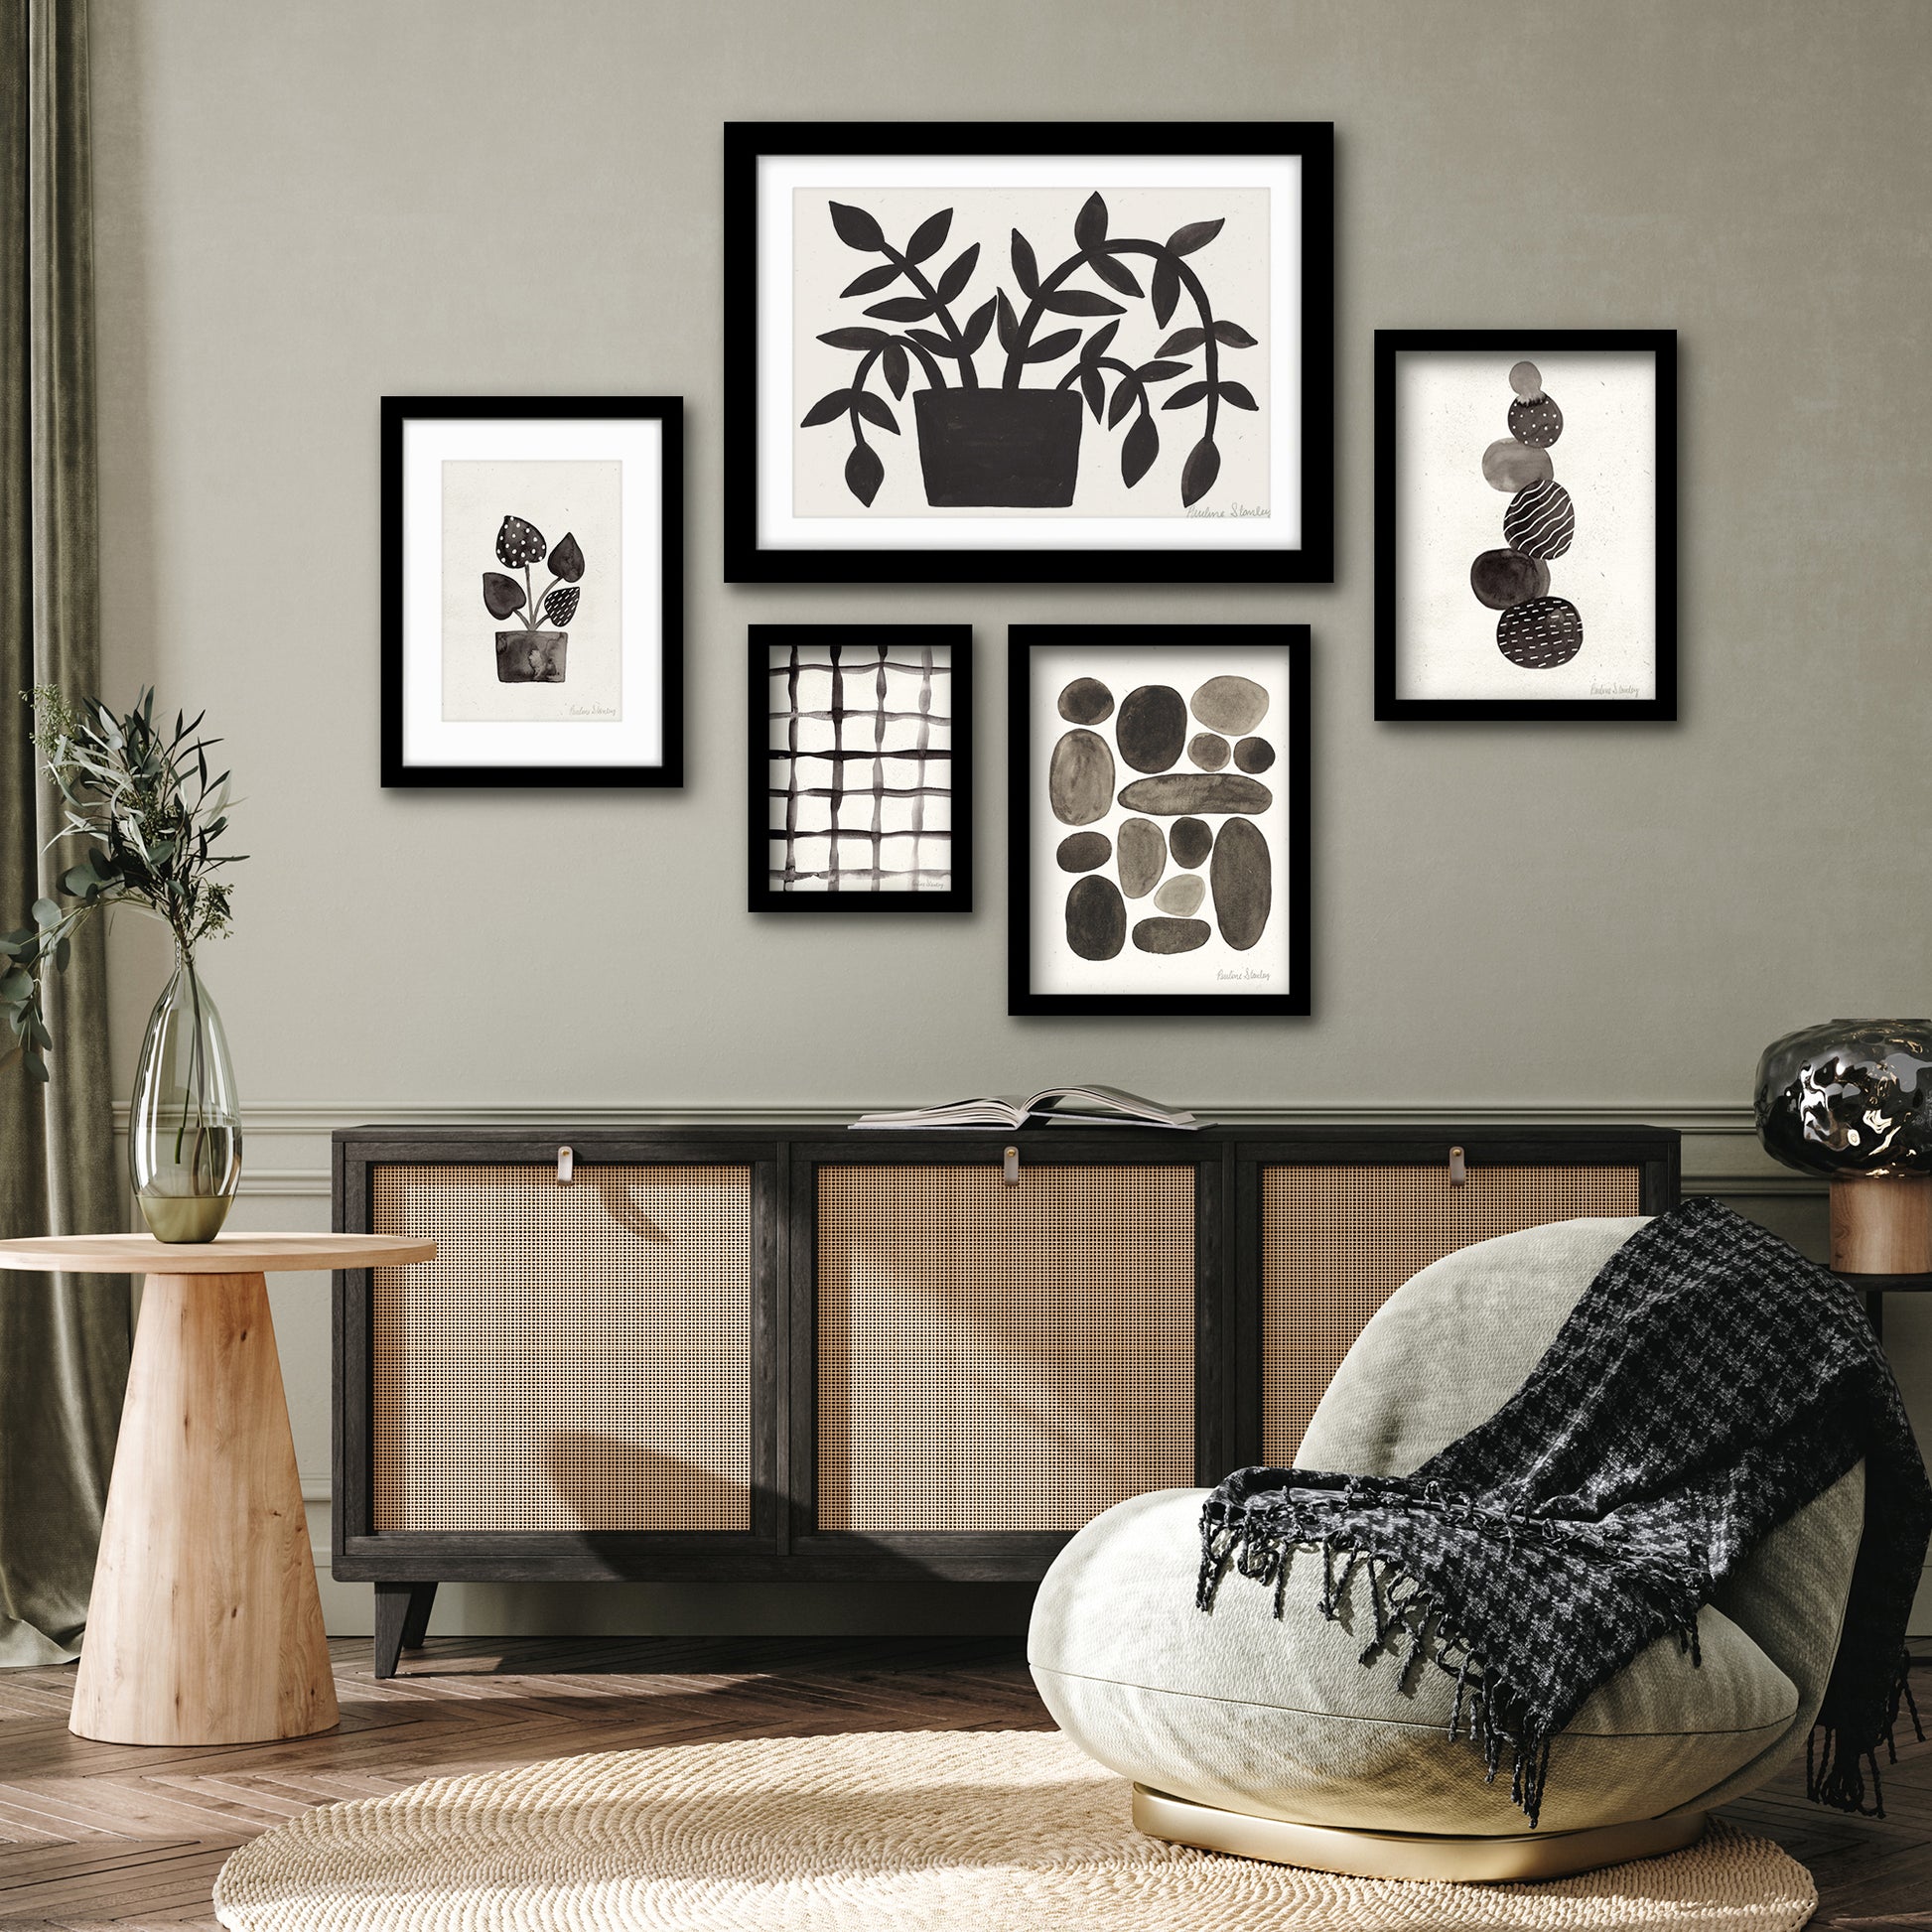 Americanflat 5 Piece Black Framed Gallery Wall Art Set - Watercolor Black Abstract Nature